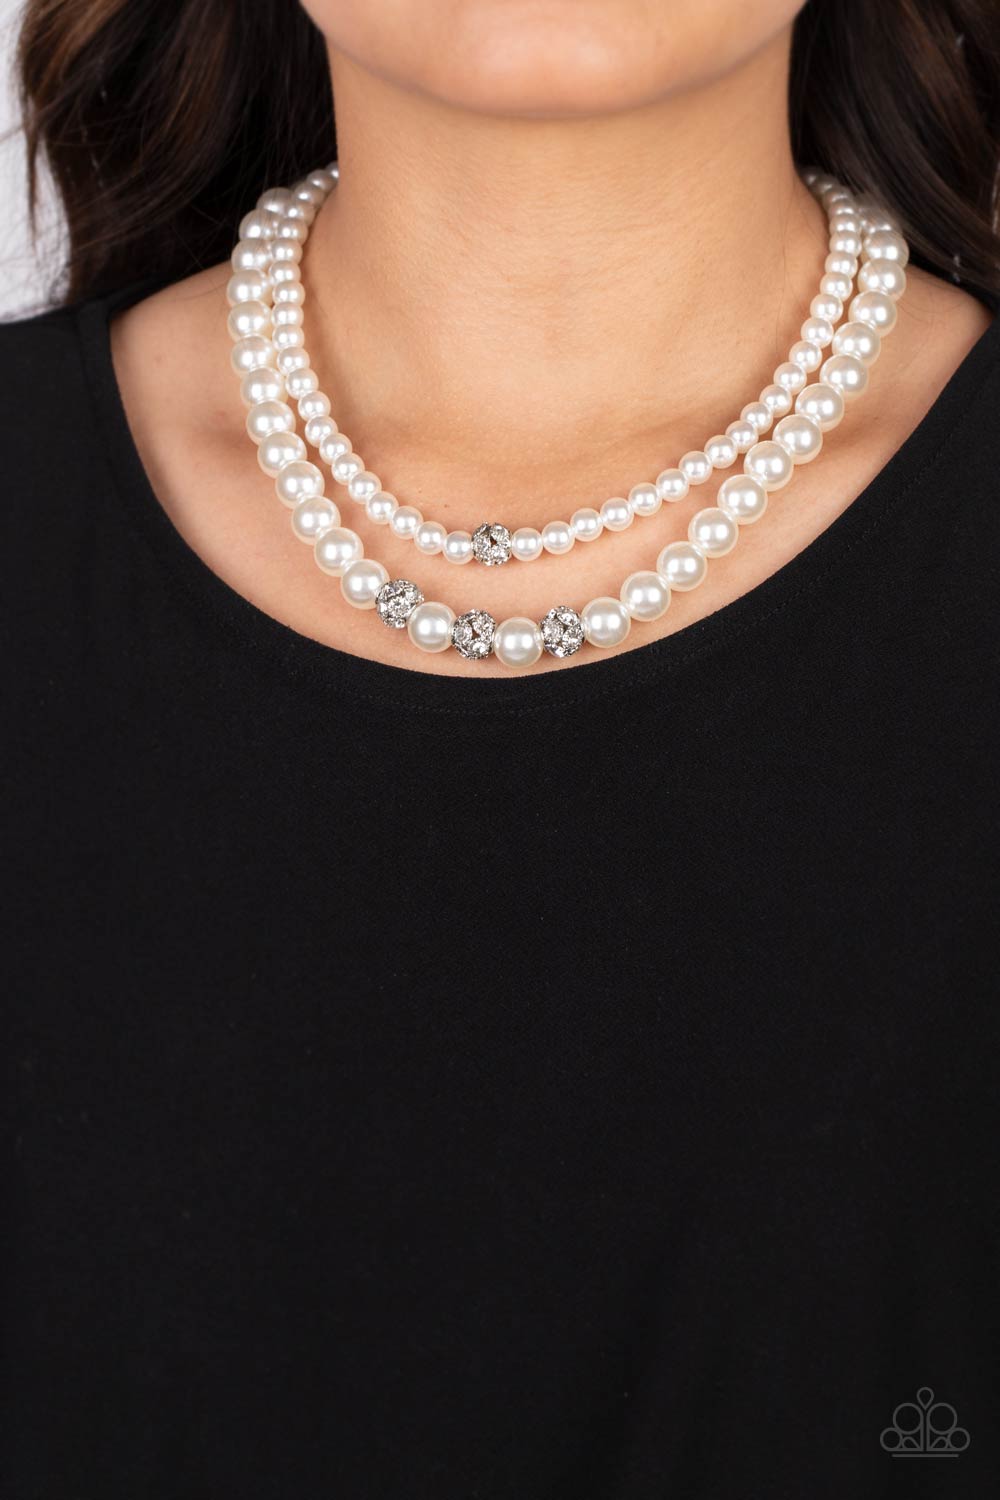 Brilliant Ballerina White Pearl Necklace - Paparazzi Accessories- lightbox - CarasShop.com - $5 Jewelry by Cara Jewels